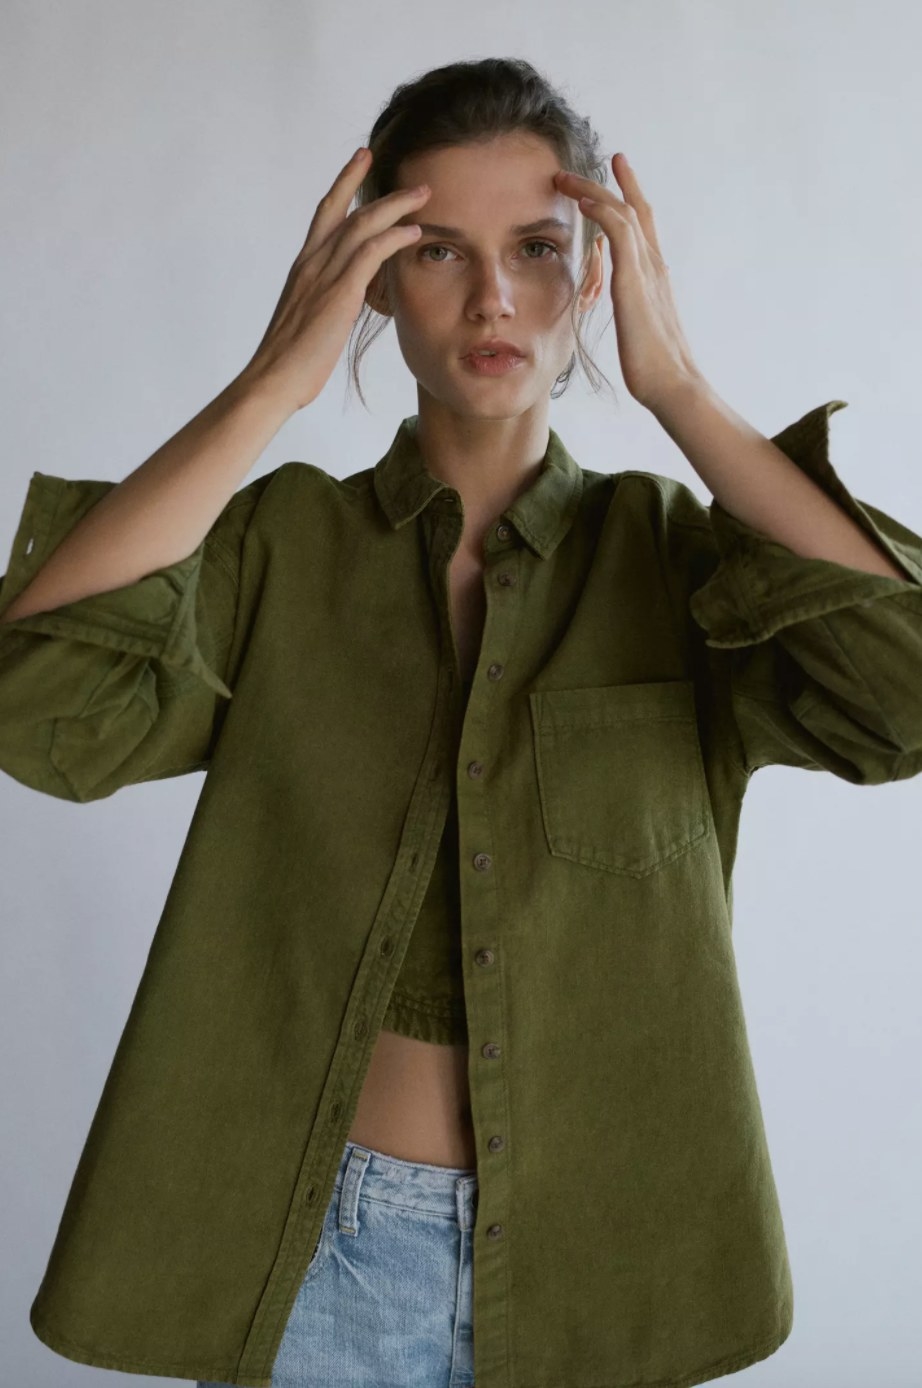 An adult is wearing the olive green tunic top